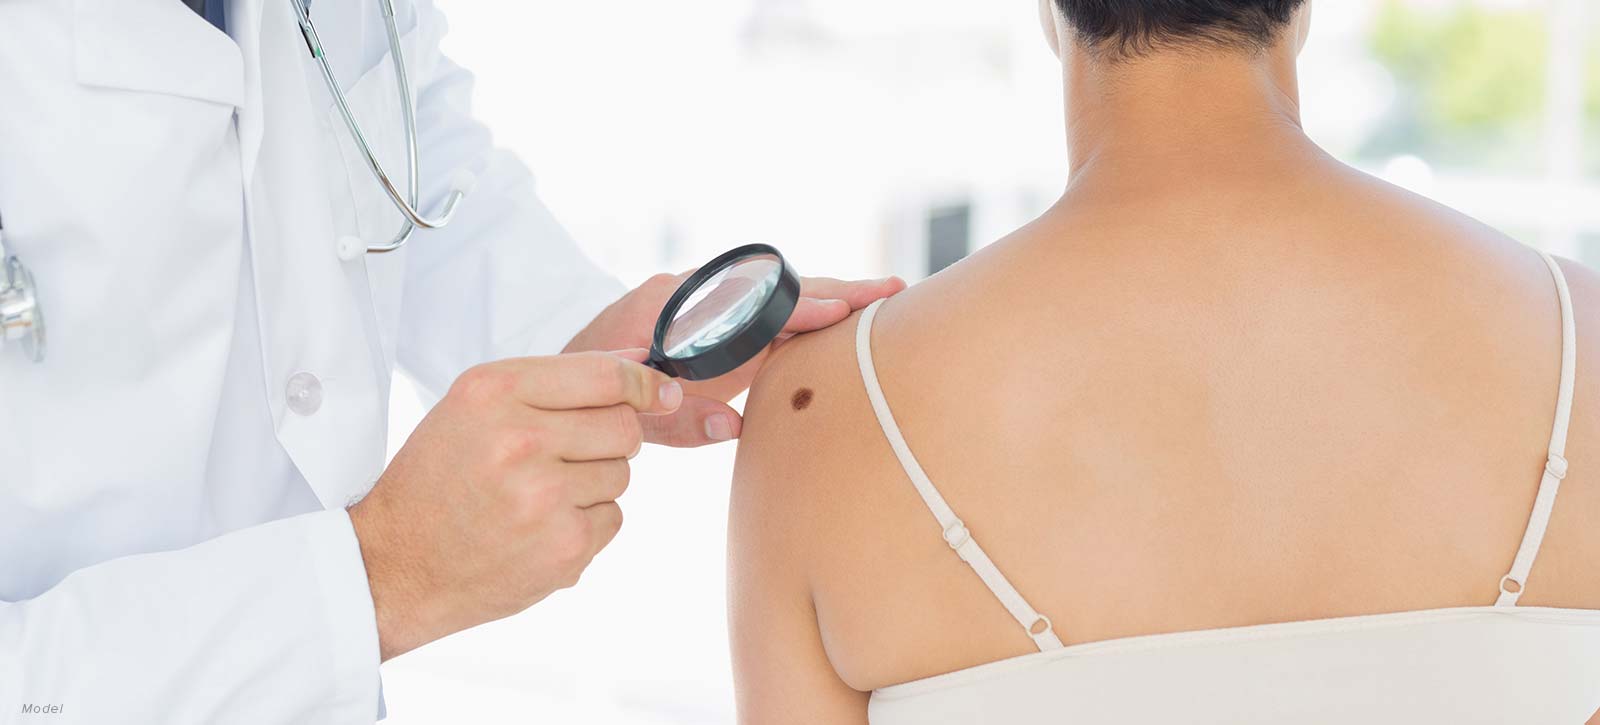 doctor looking at a mole on a patient's back